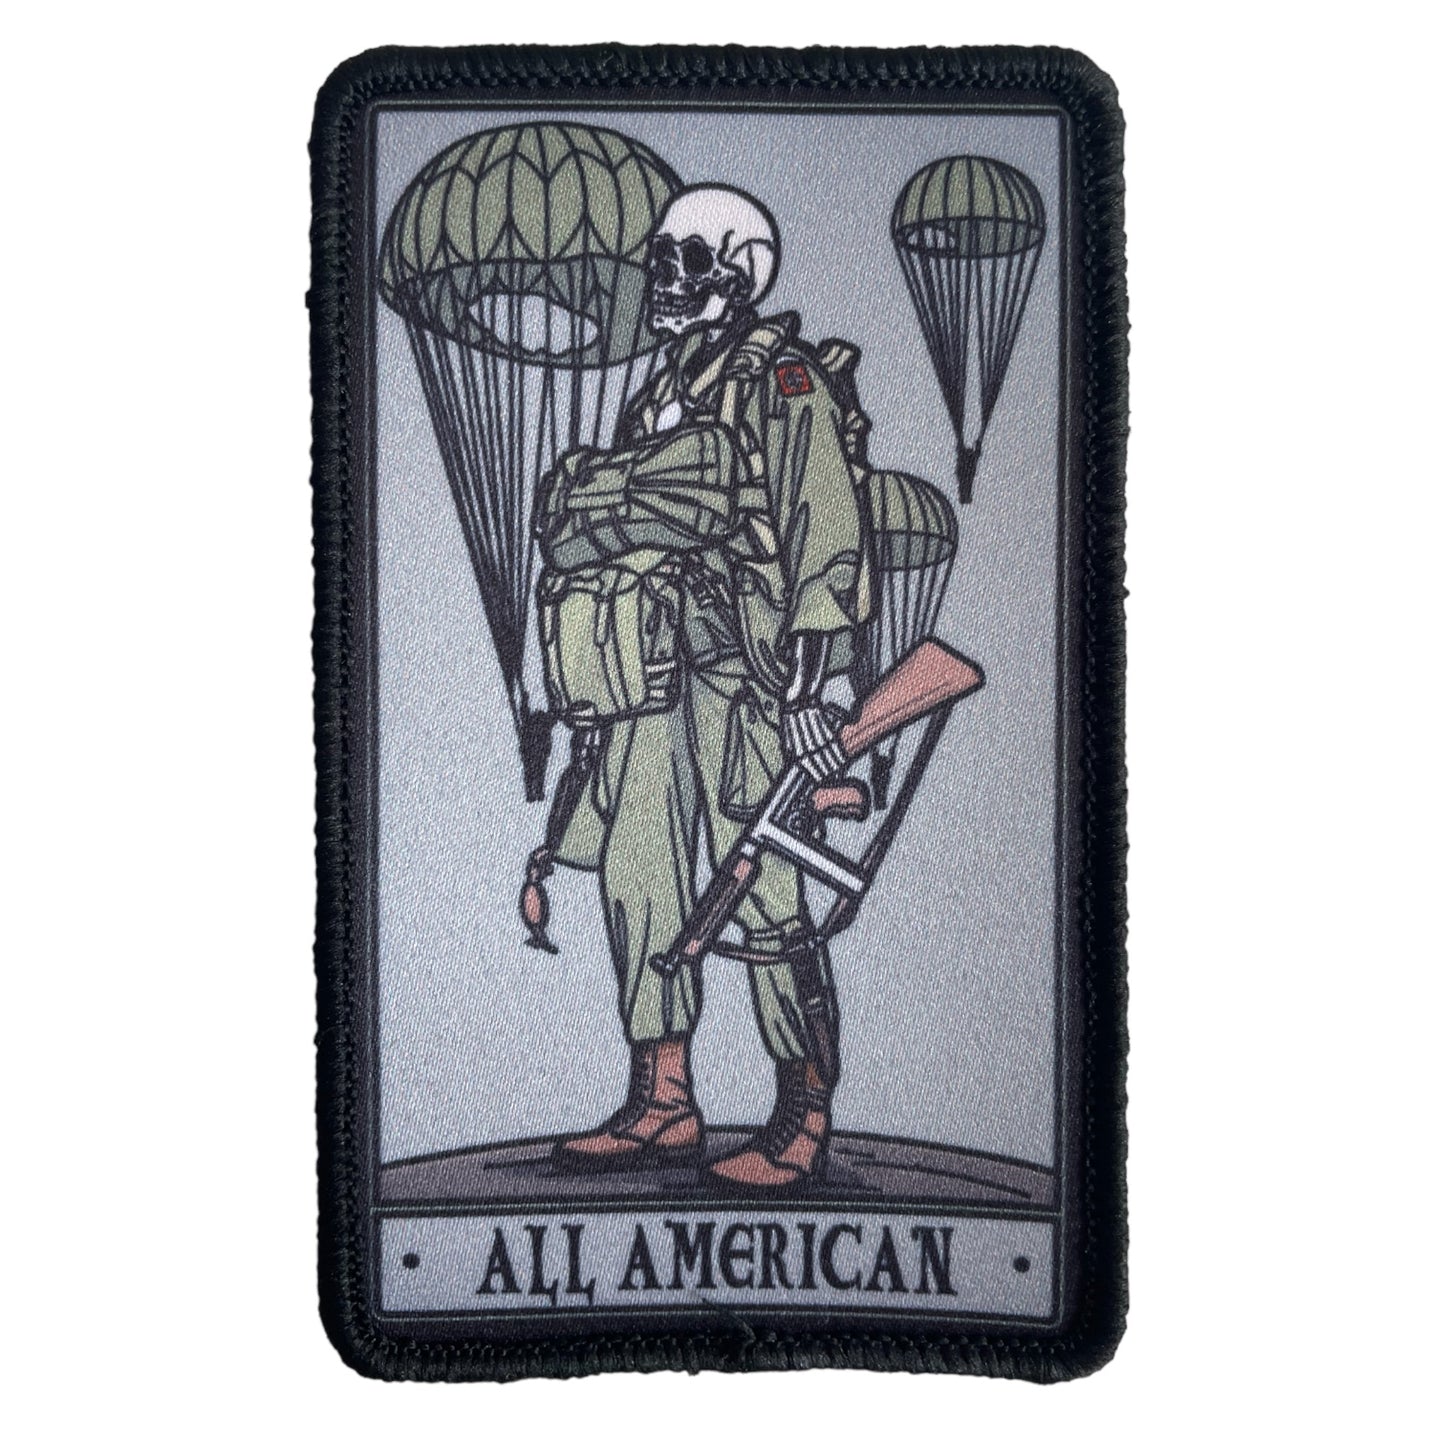 All American Patch